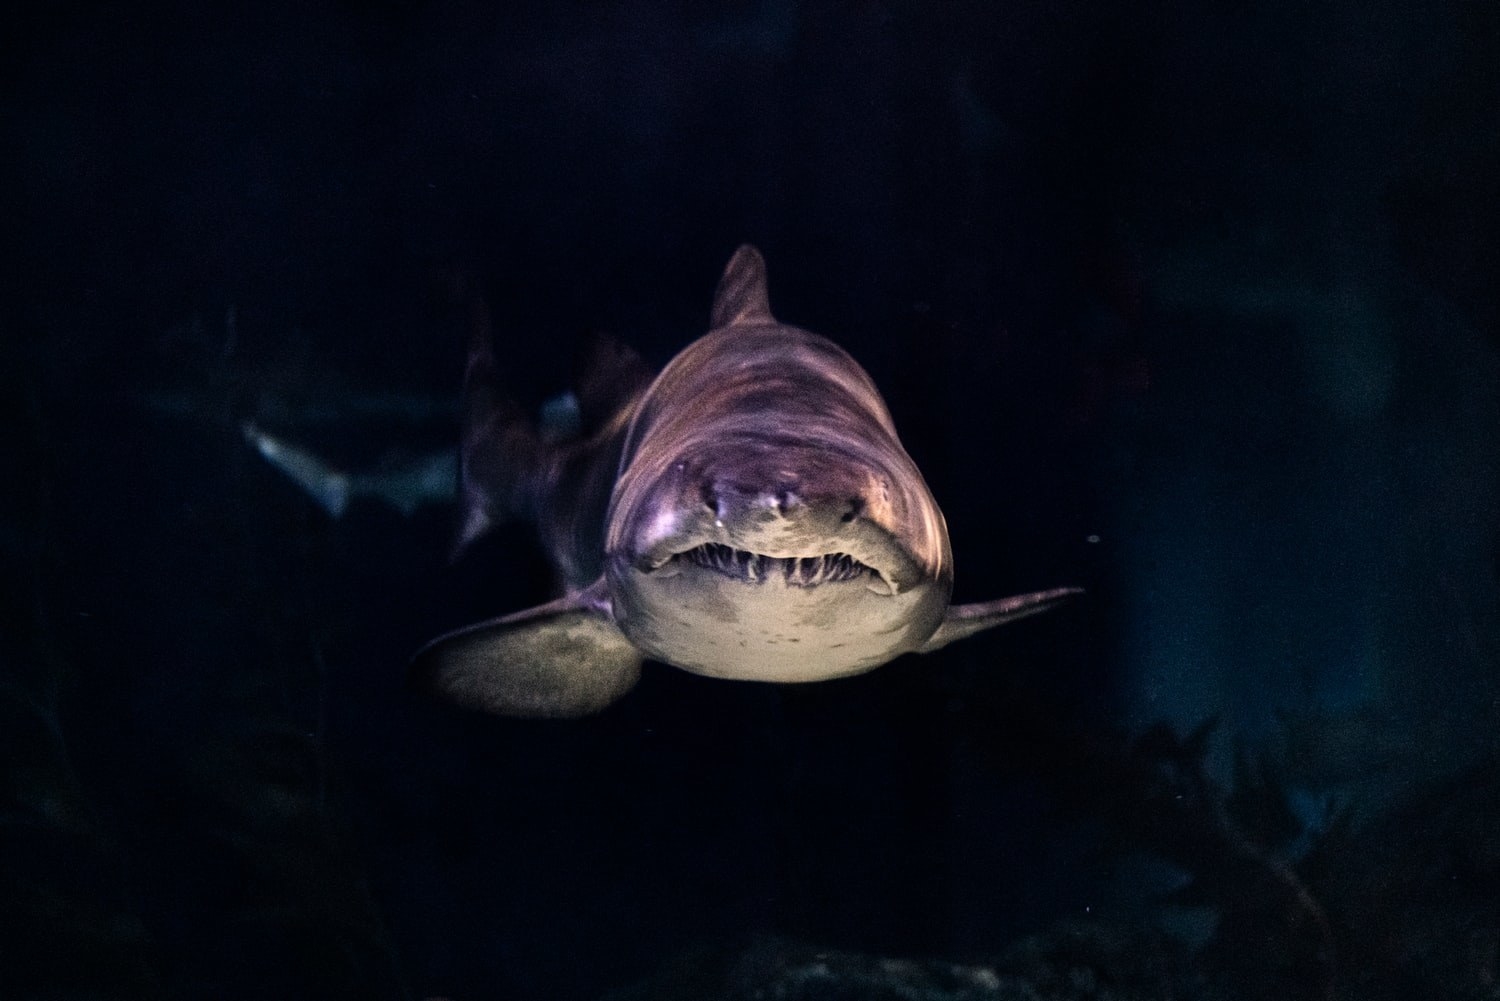 Shark coming directly at the screen, teeth showing and looking scary. 